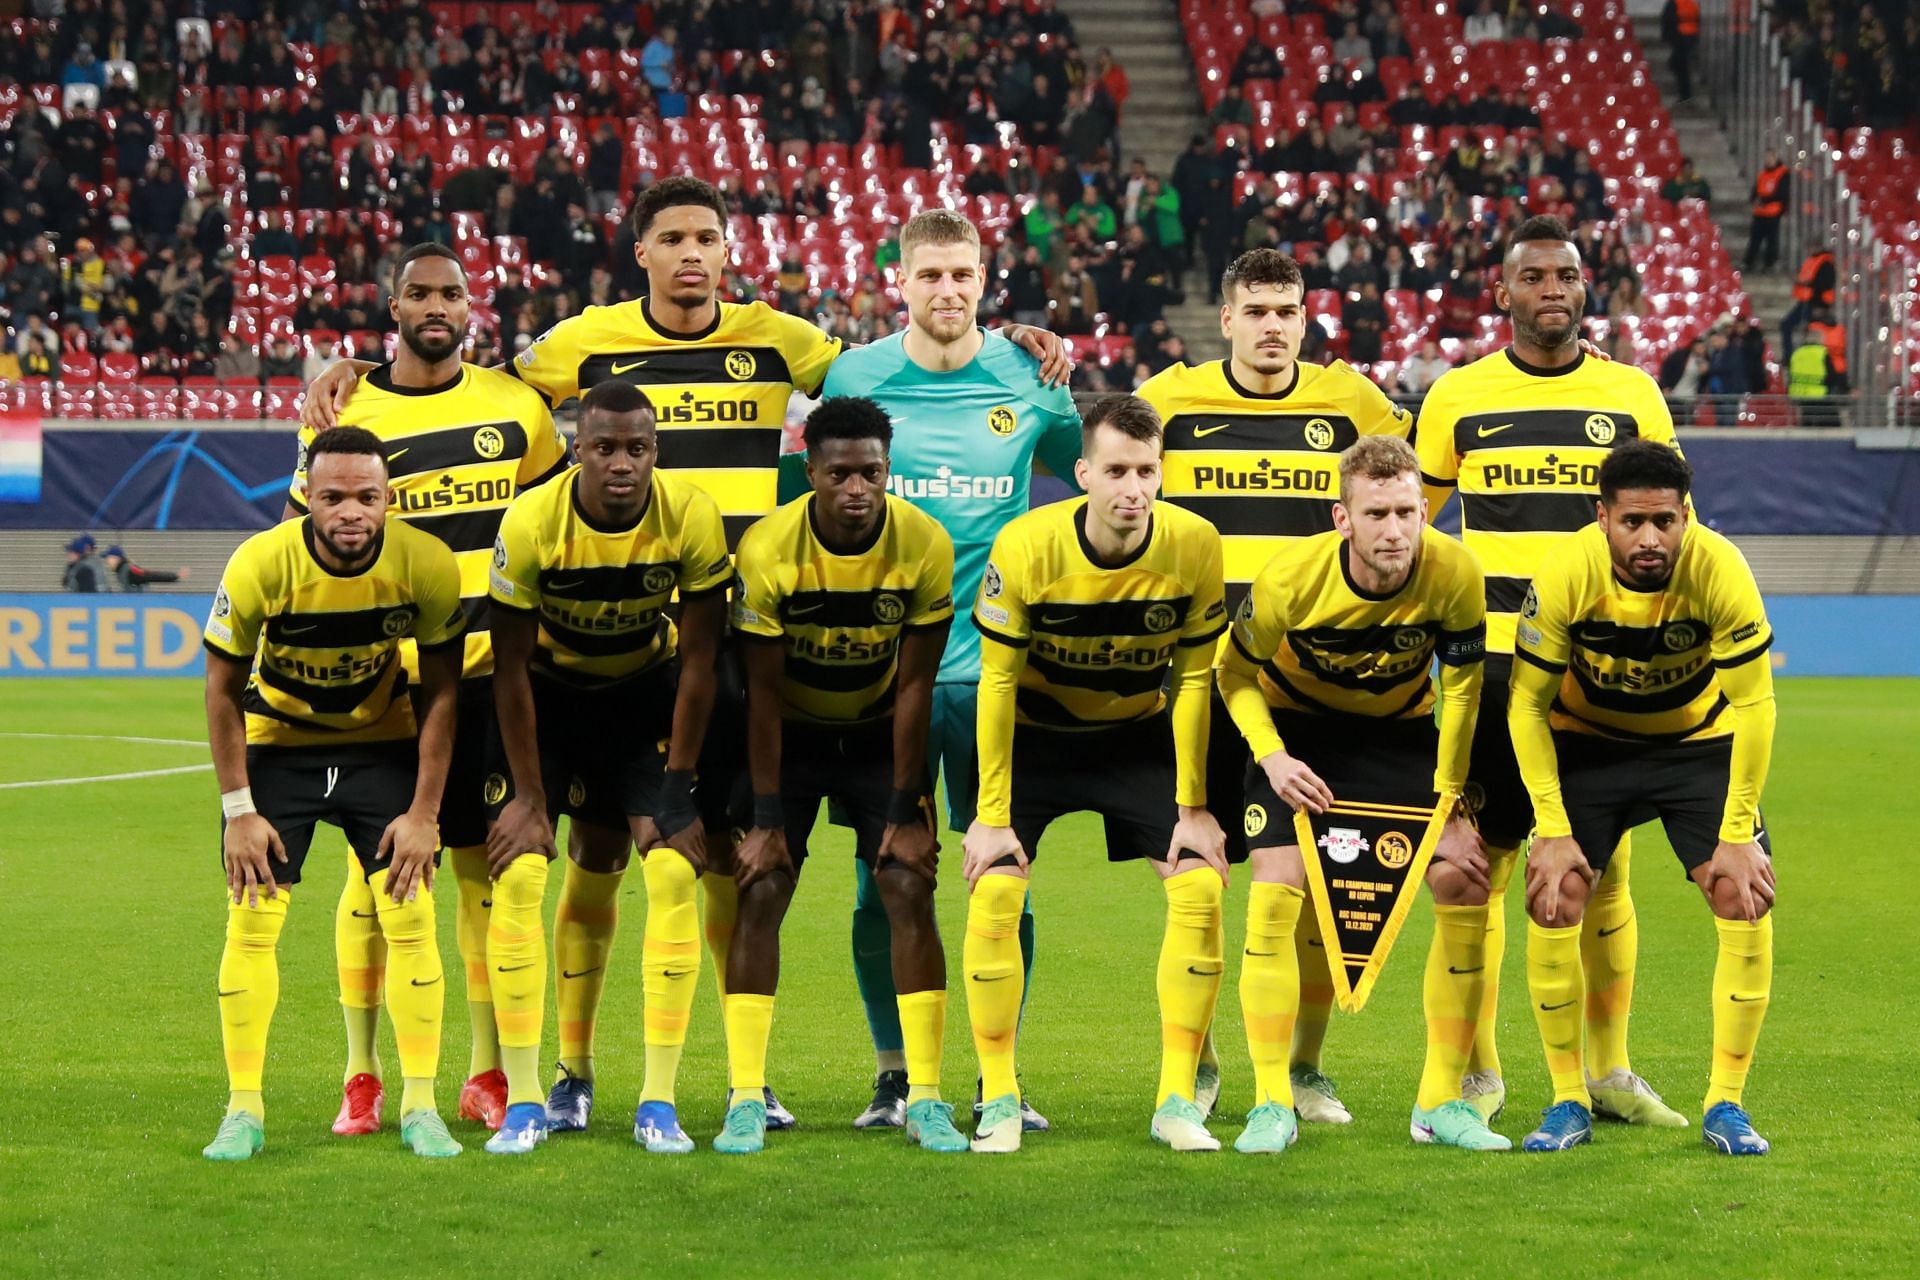 Young Boys face FC Zurich on Sunday 